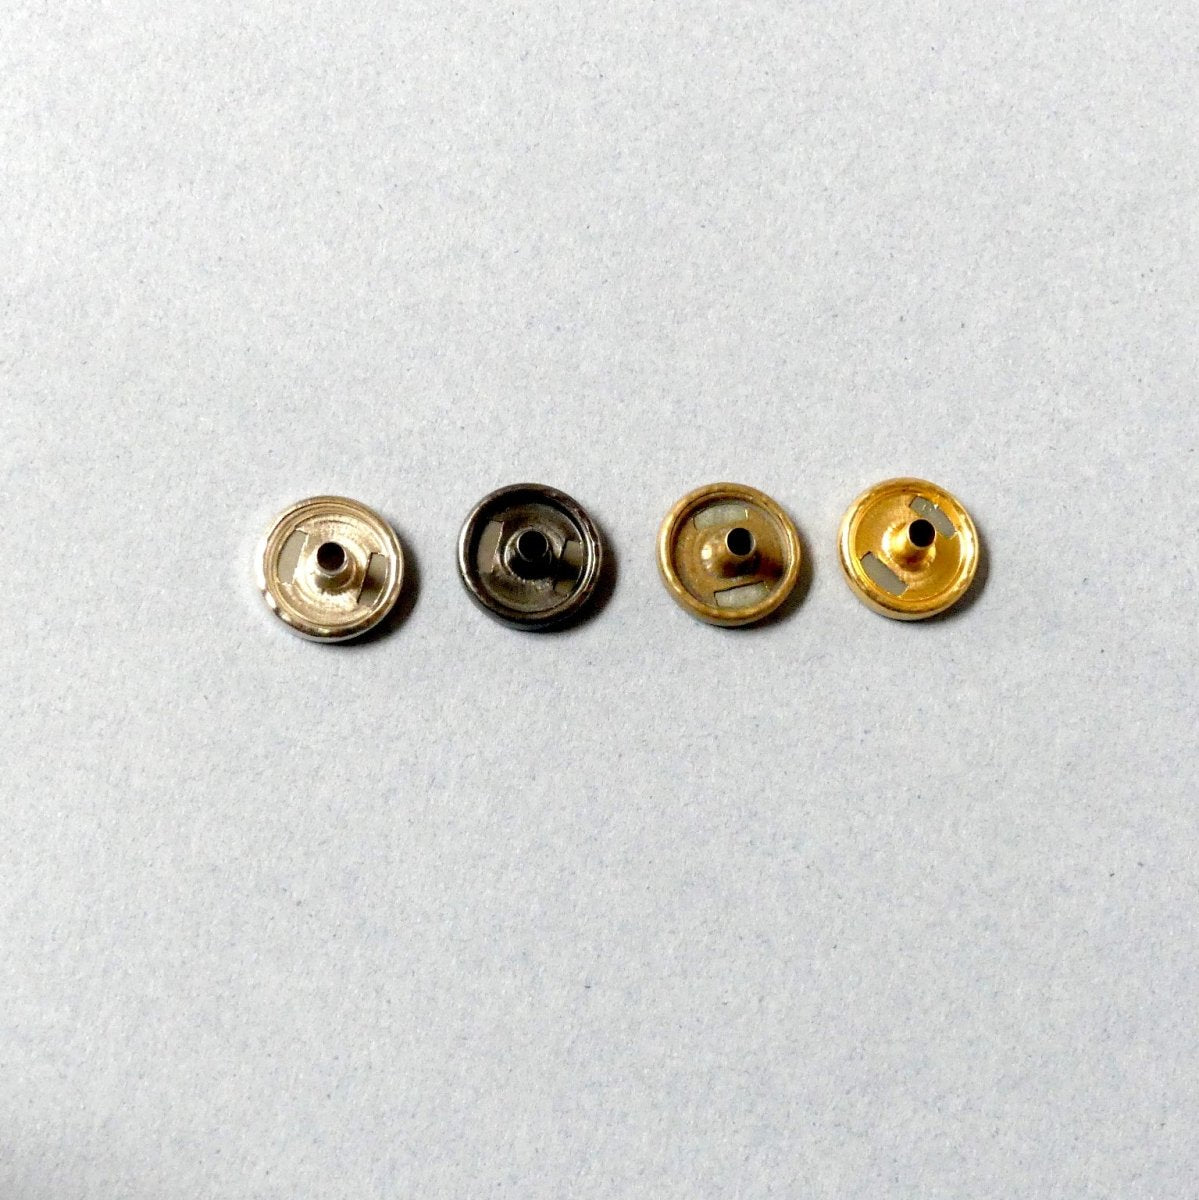 4 different colors of metal snap buttons